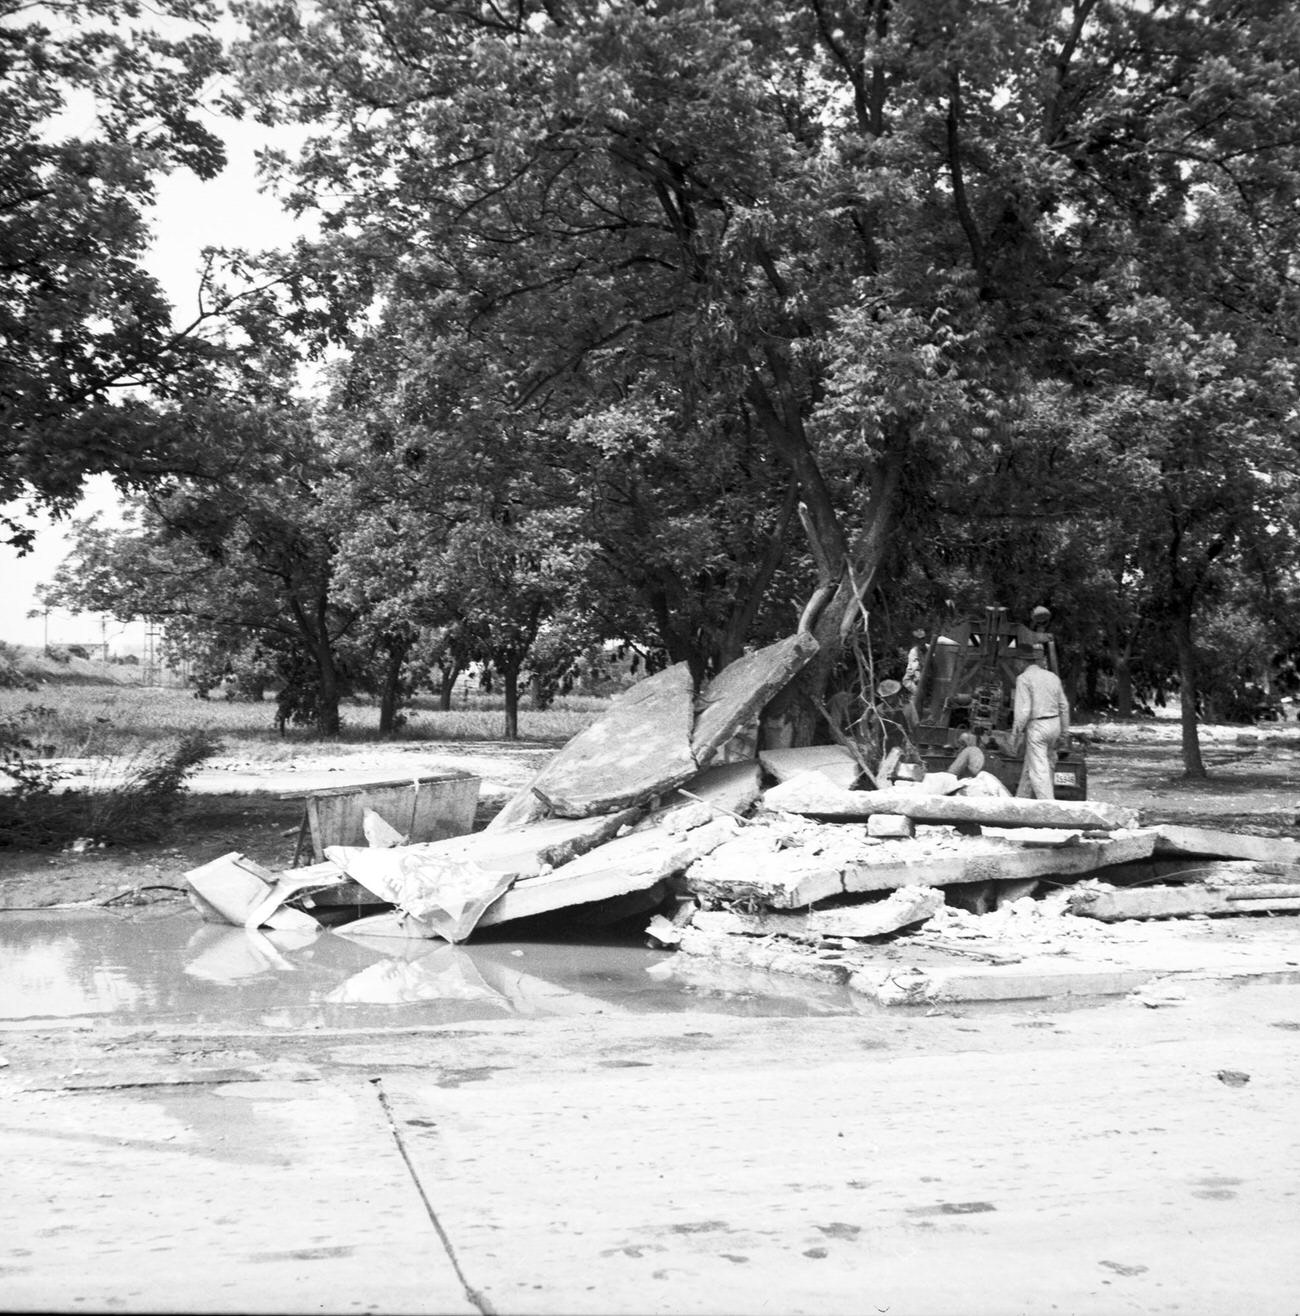 Men clearing concrete debris and wreckage after flood, 1949